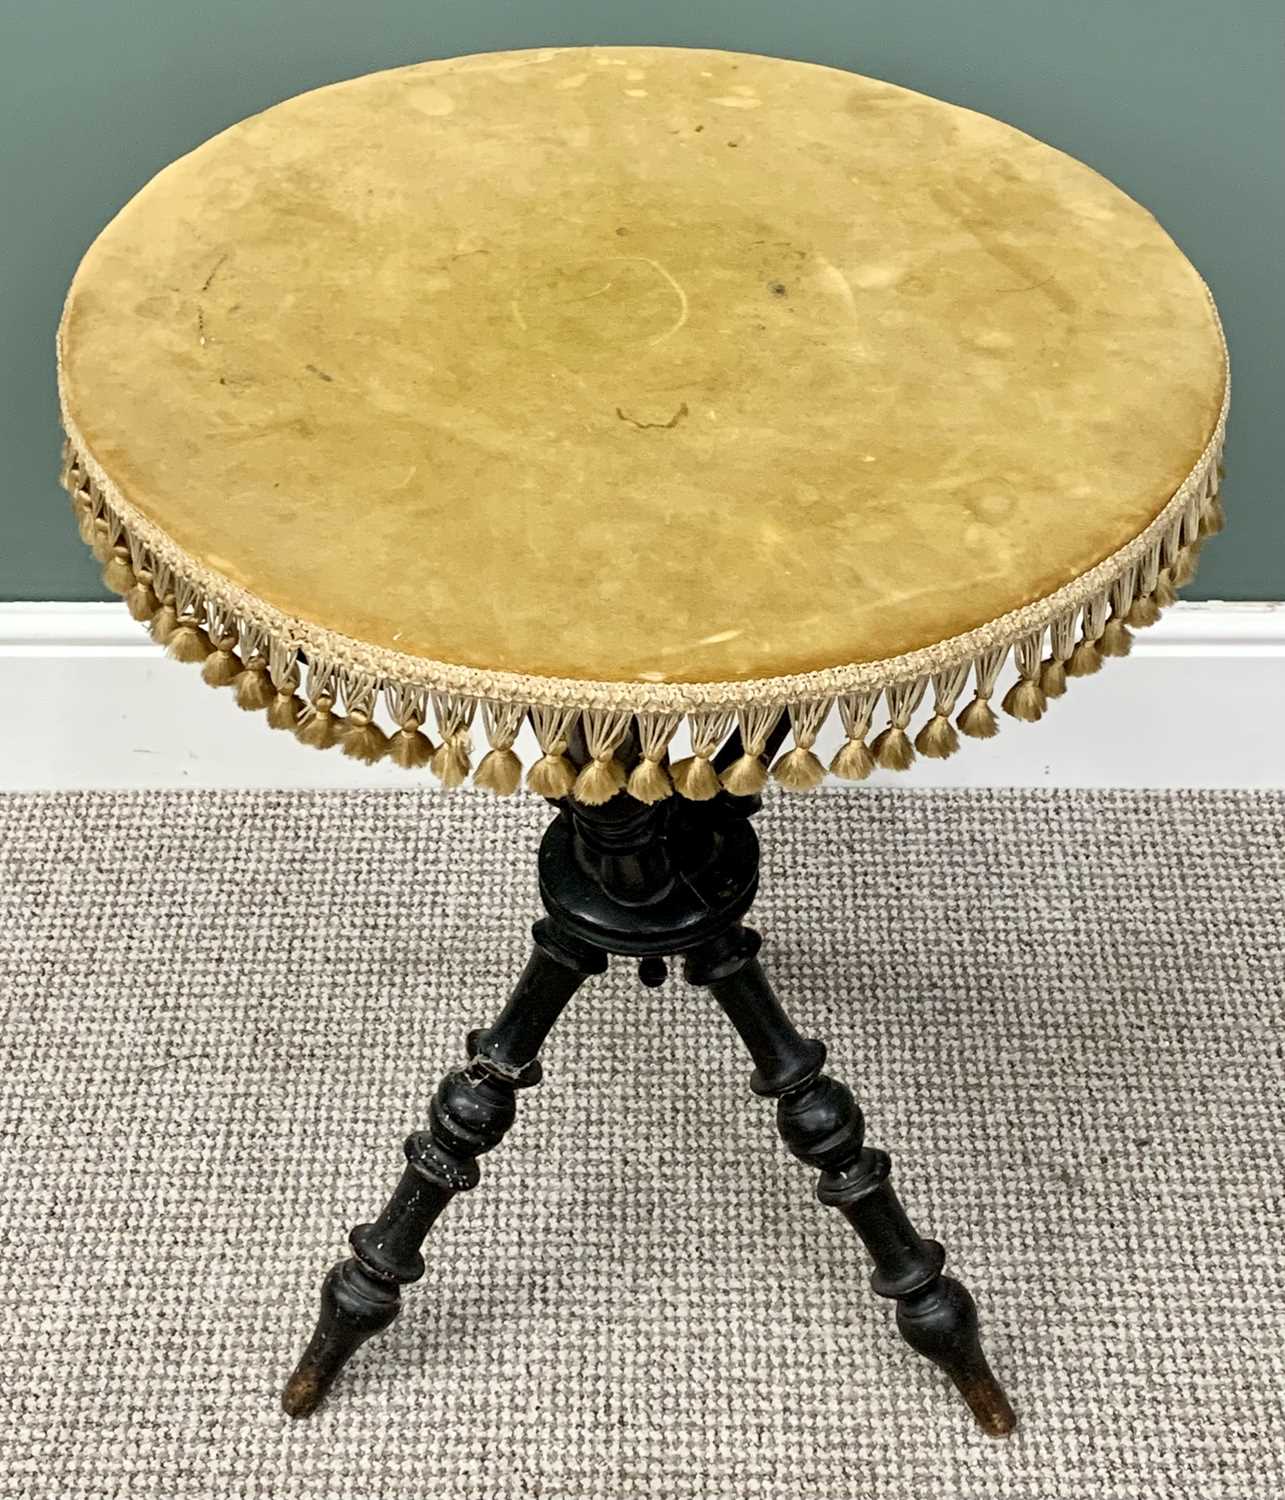 VICTORIAN EBONIZED GYPSY TABLE - 67cms H, 54cms diameter & TWO VINTAGE STOOLS - 31cms H, 35cms W, - Image 3 of 3